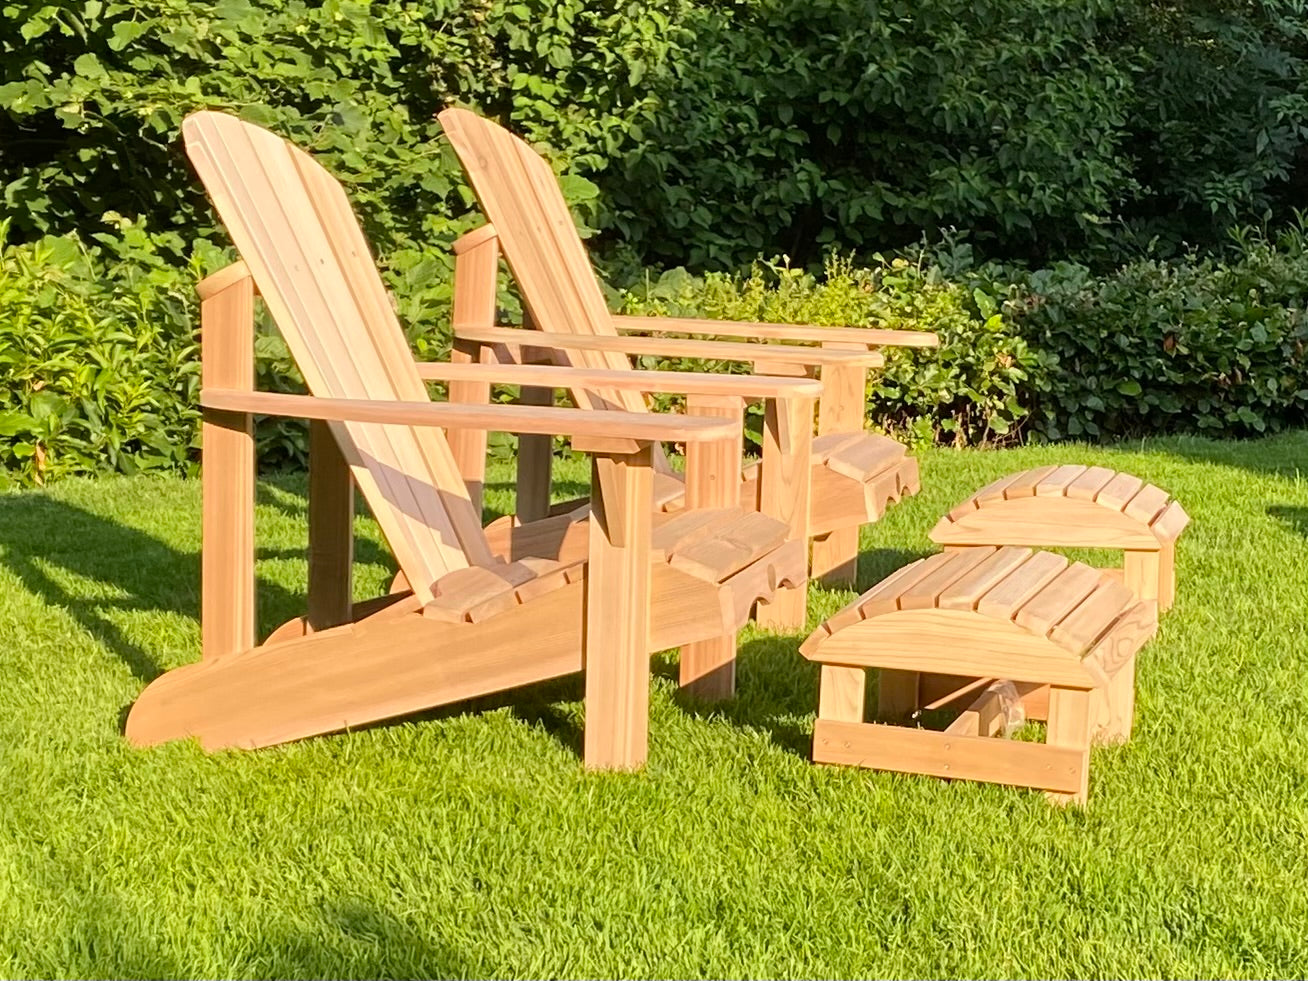 2 Classic Adirondack Chairs with stool